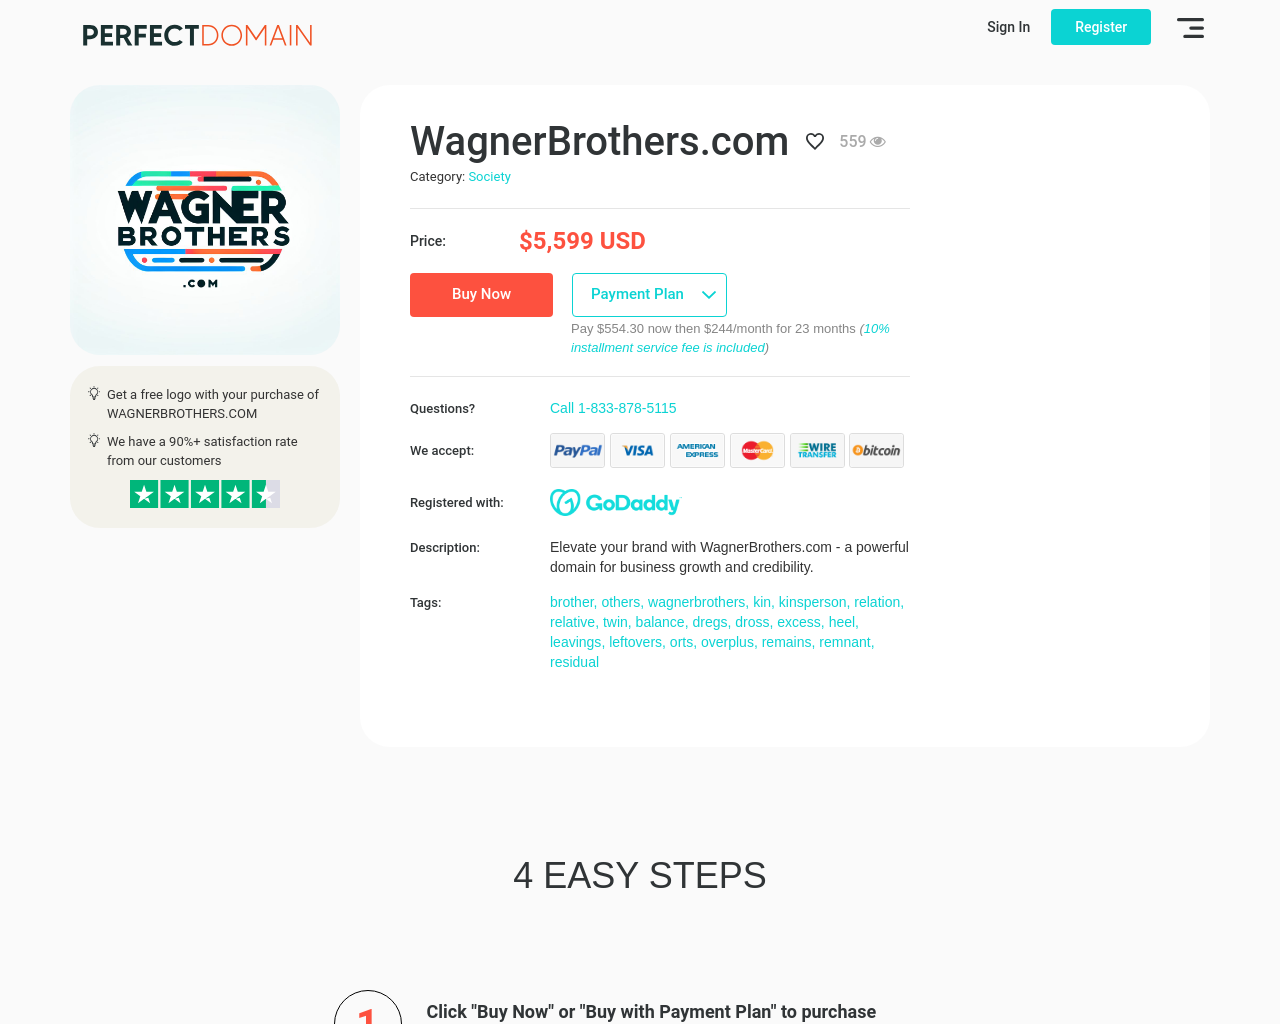 wagnerbrothers.com